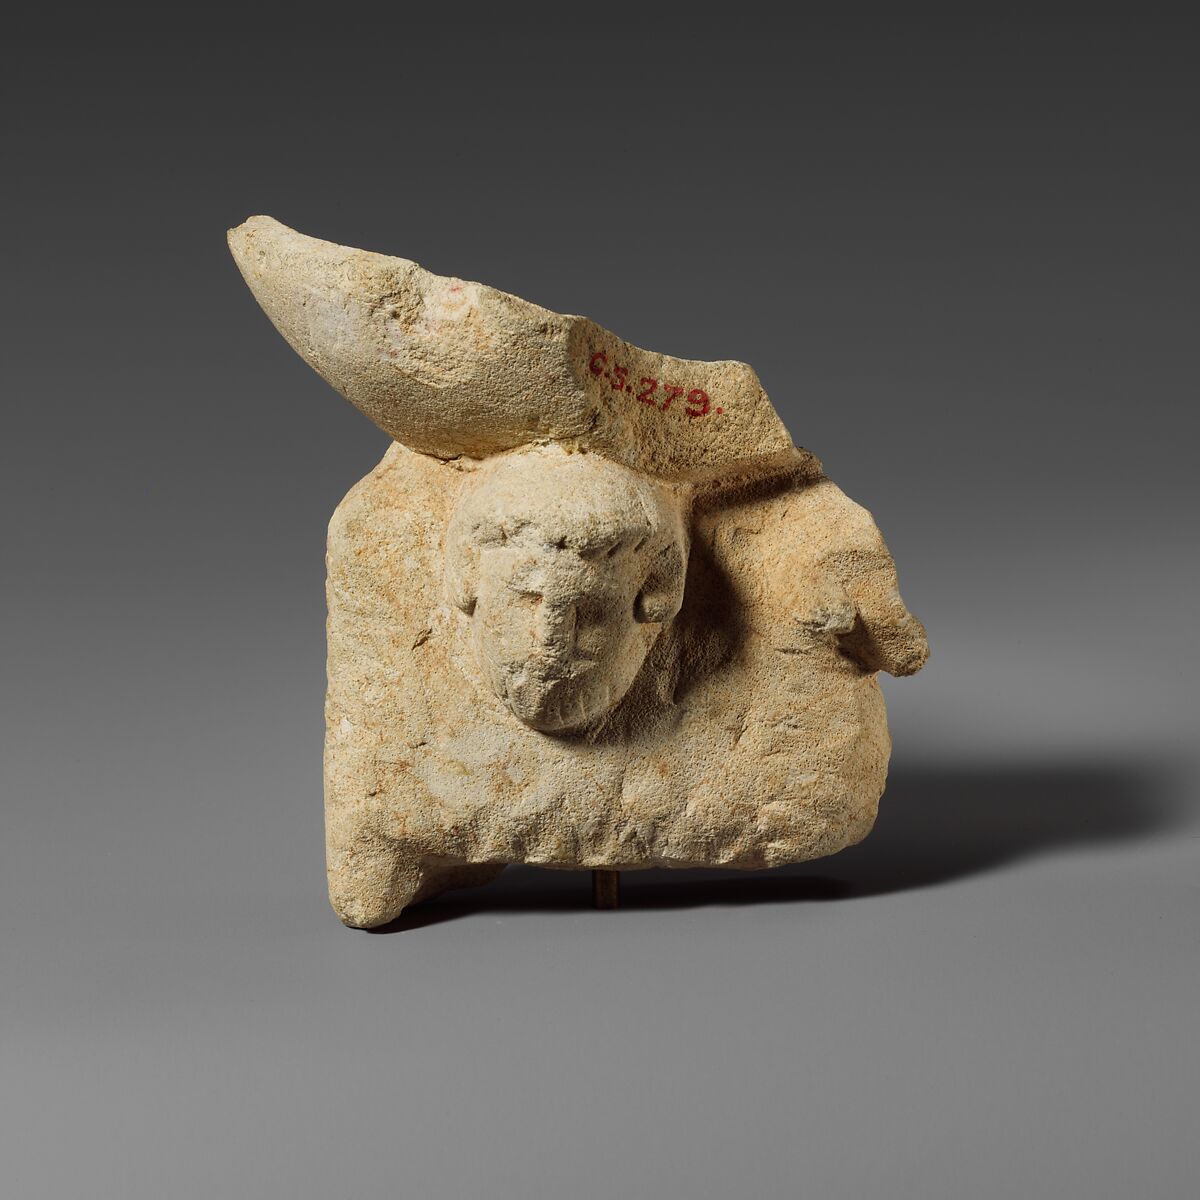 Limestone ram and head of “Zeus Ammon” supporting an incense burner, Limestone, Cypriot 